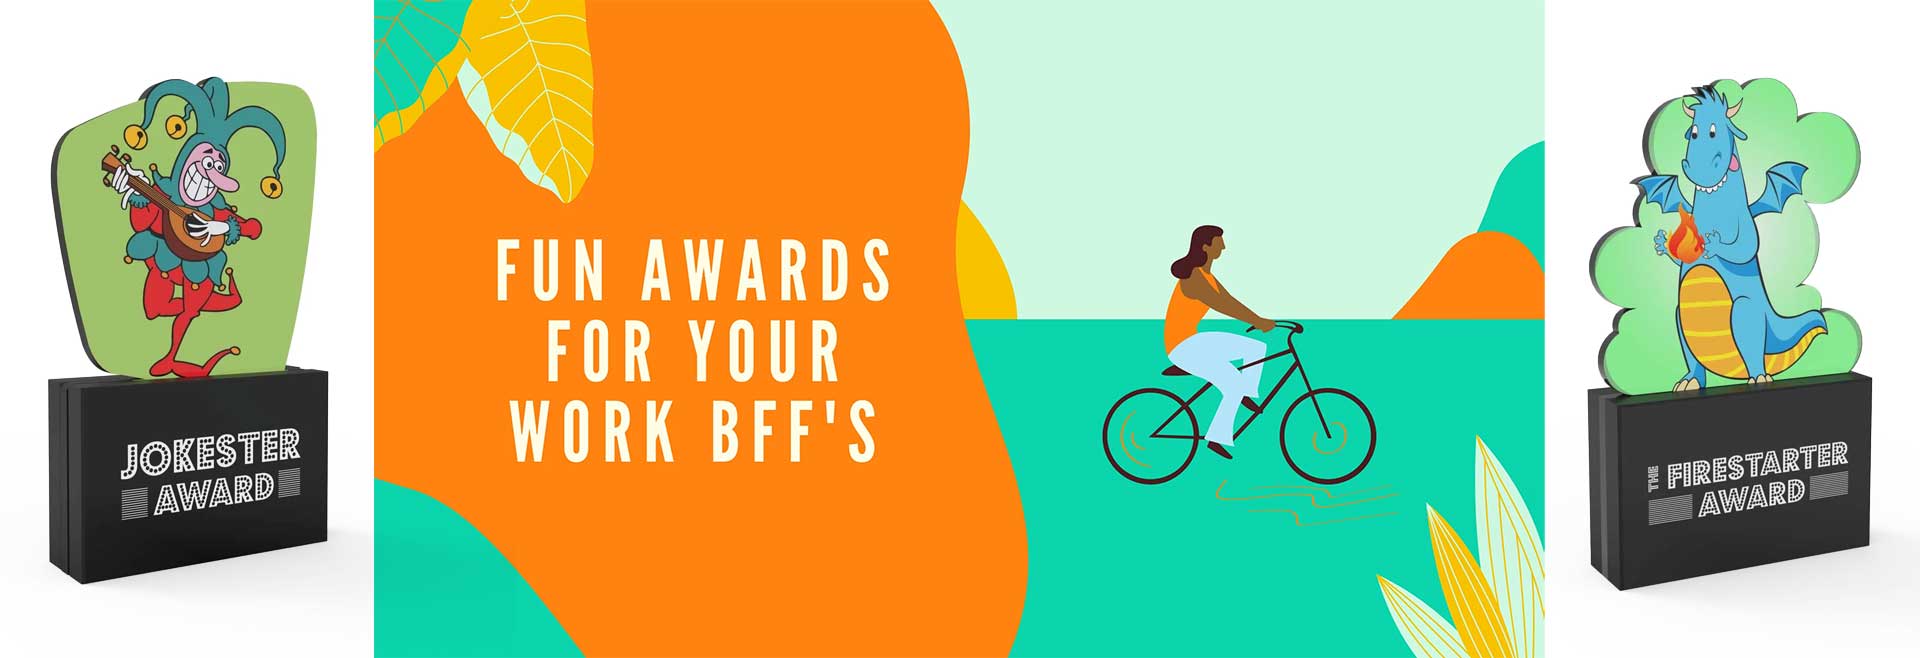 Fun Awards for your Work BFFs